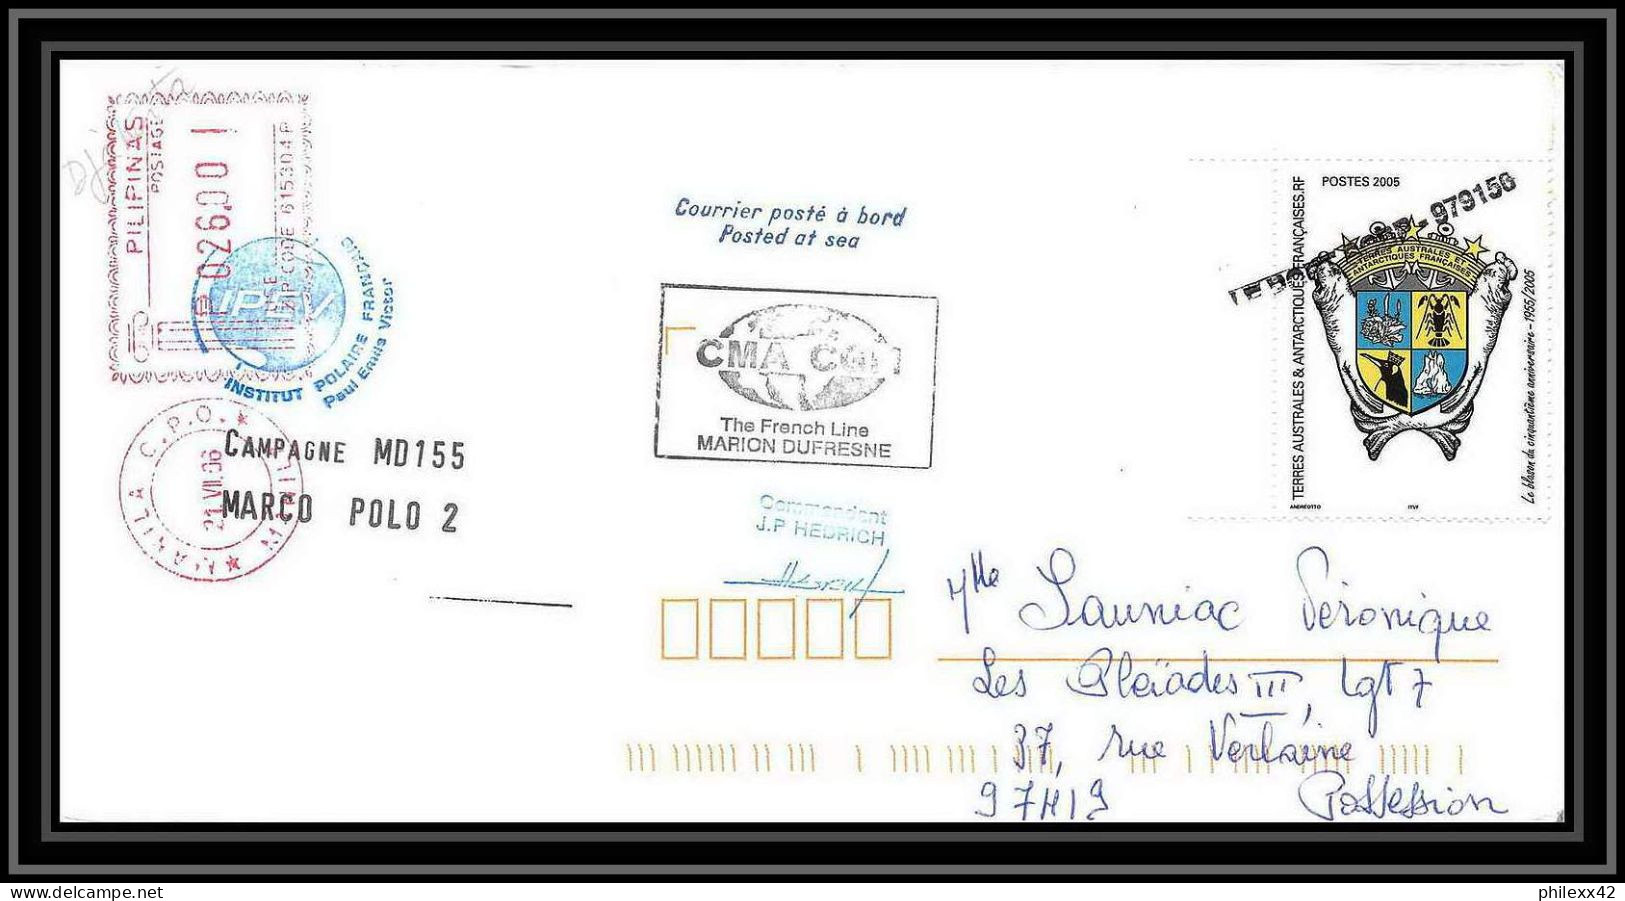 2592 ANTARCTIC Taaf Philippines Pilipinas Mixte Lettre Cover Dufresne 2 Signé Signed Md 155 Marco Polo 2 2006  - Philippines